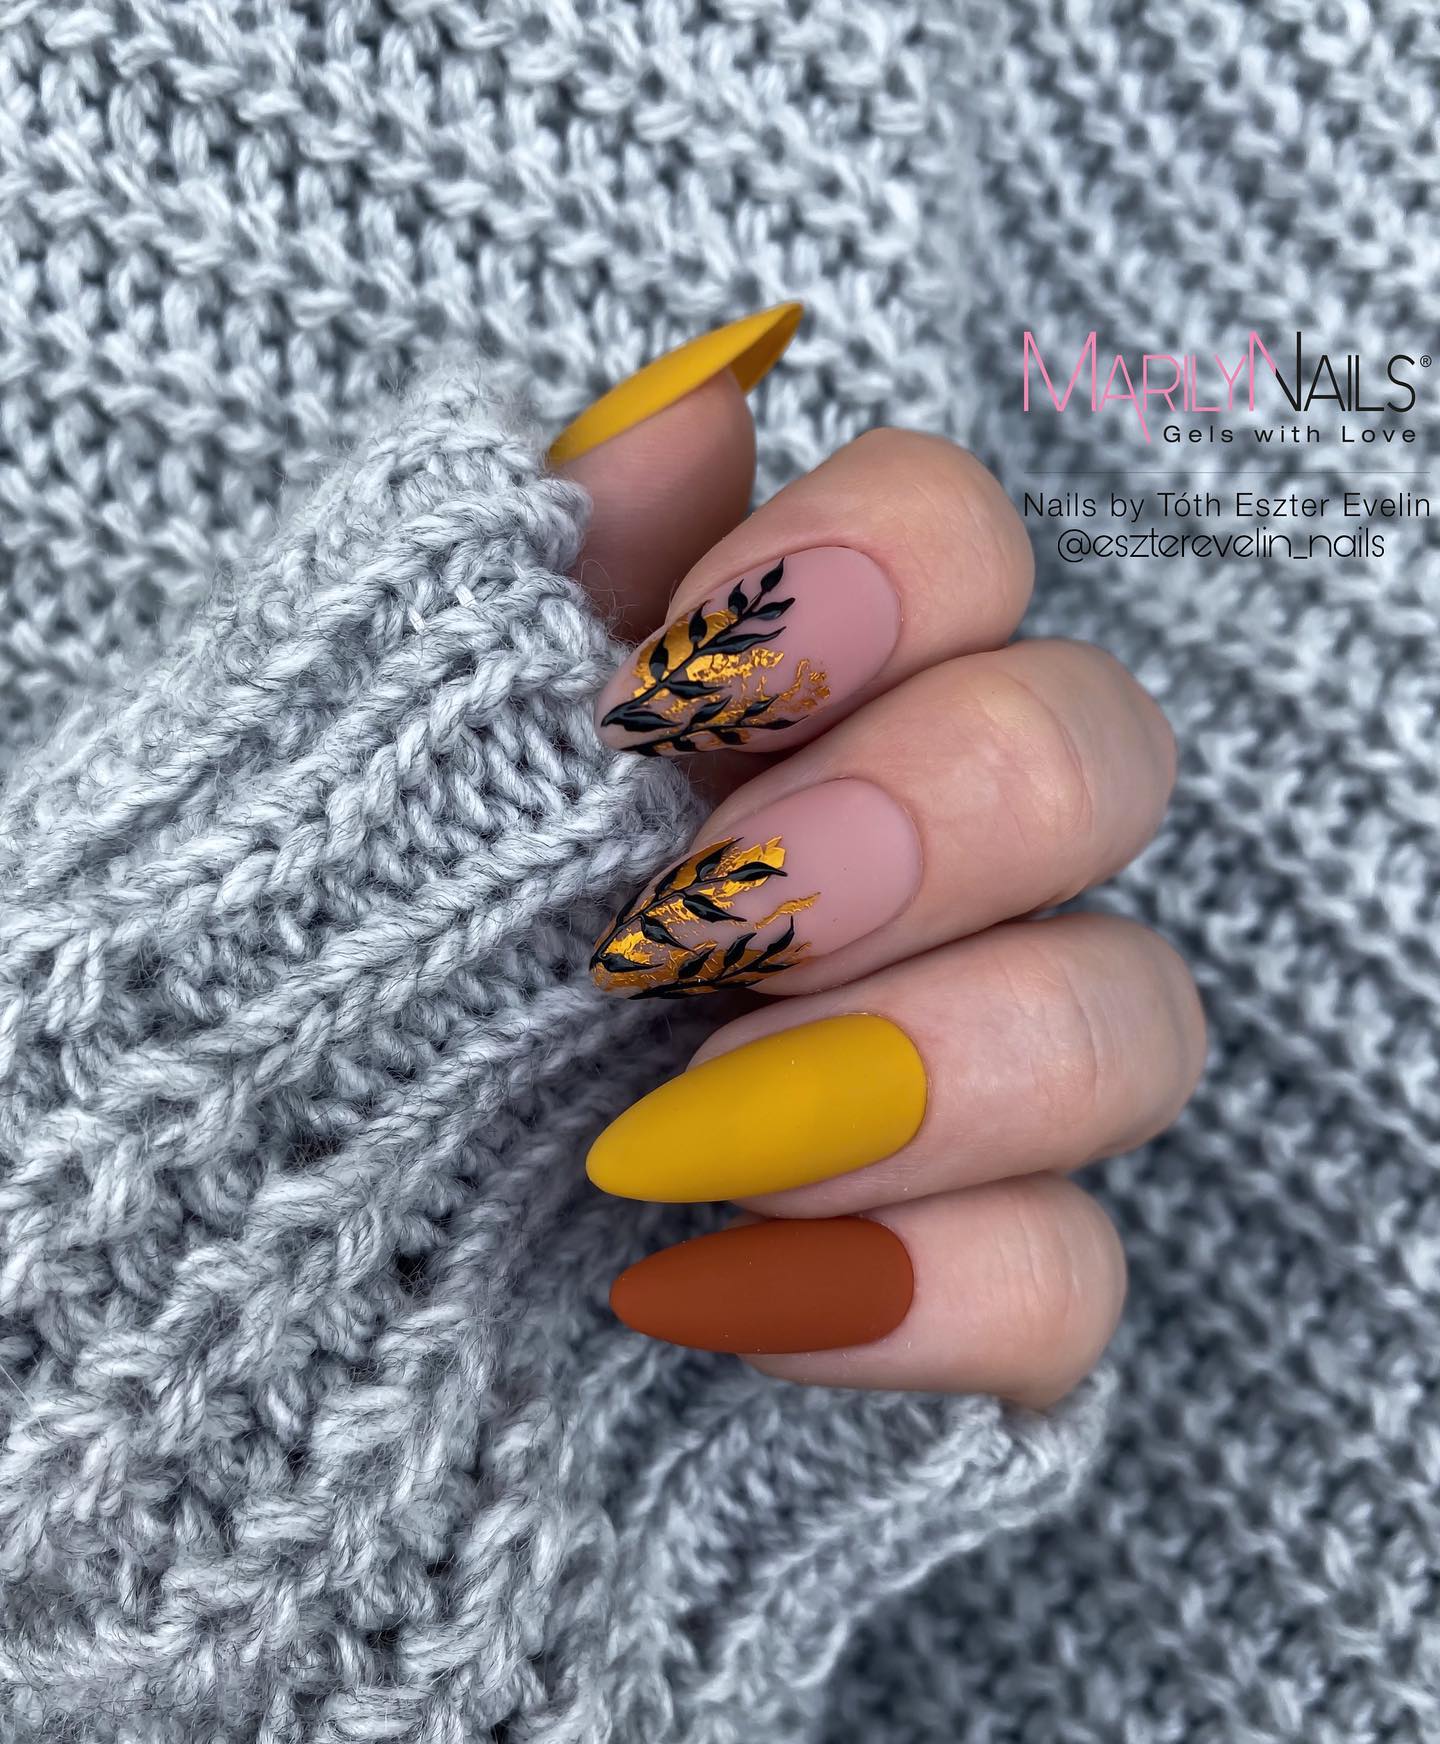 65 Fabulous Fall Nail Designs To Spice Up Your Autumn Style | Pretty ...